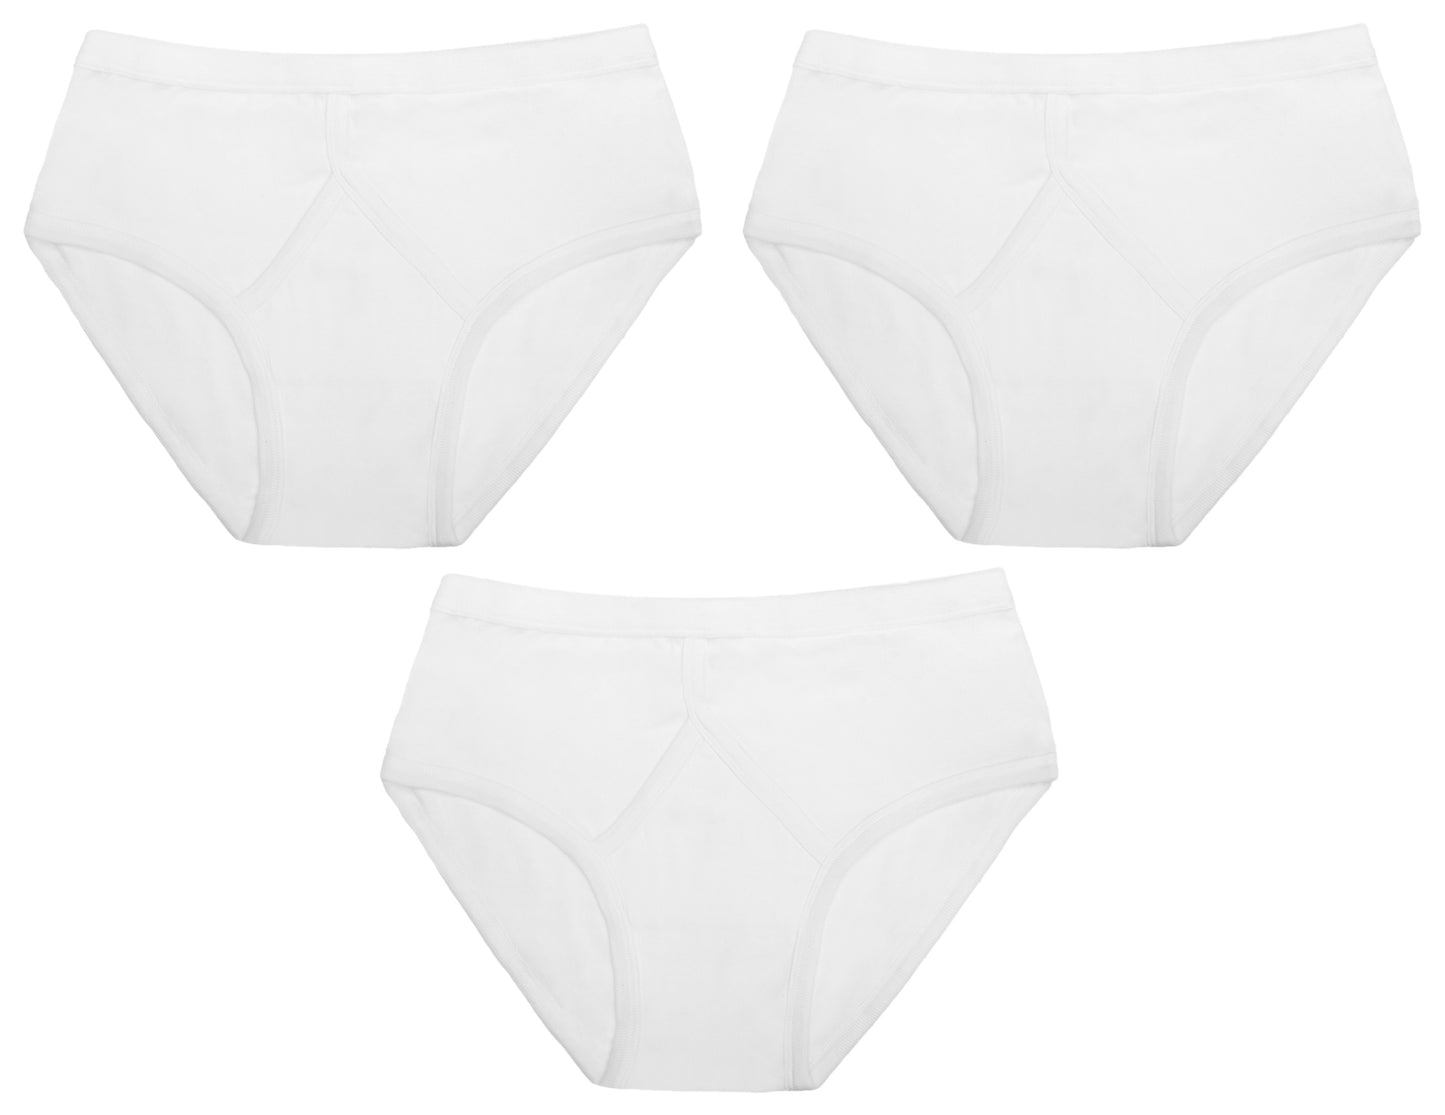 3 Pairs Men's Keyhole Briefs Classic White Cotton Jersey Y-Fronts Underpants OEKO-TEX Certified